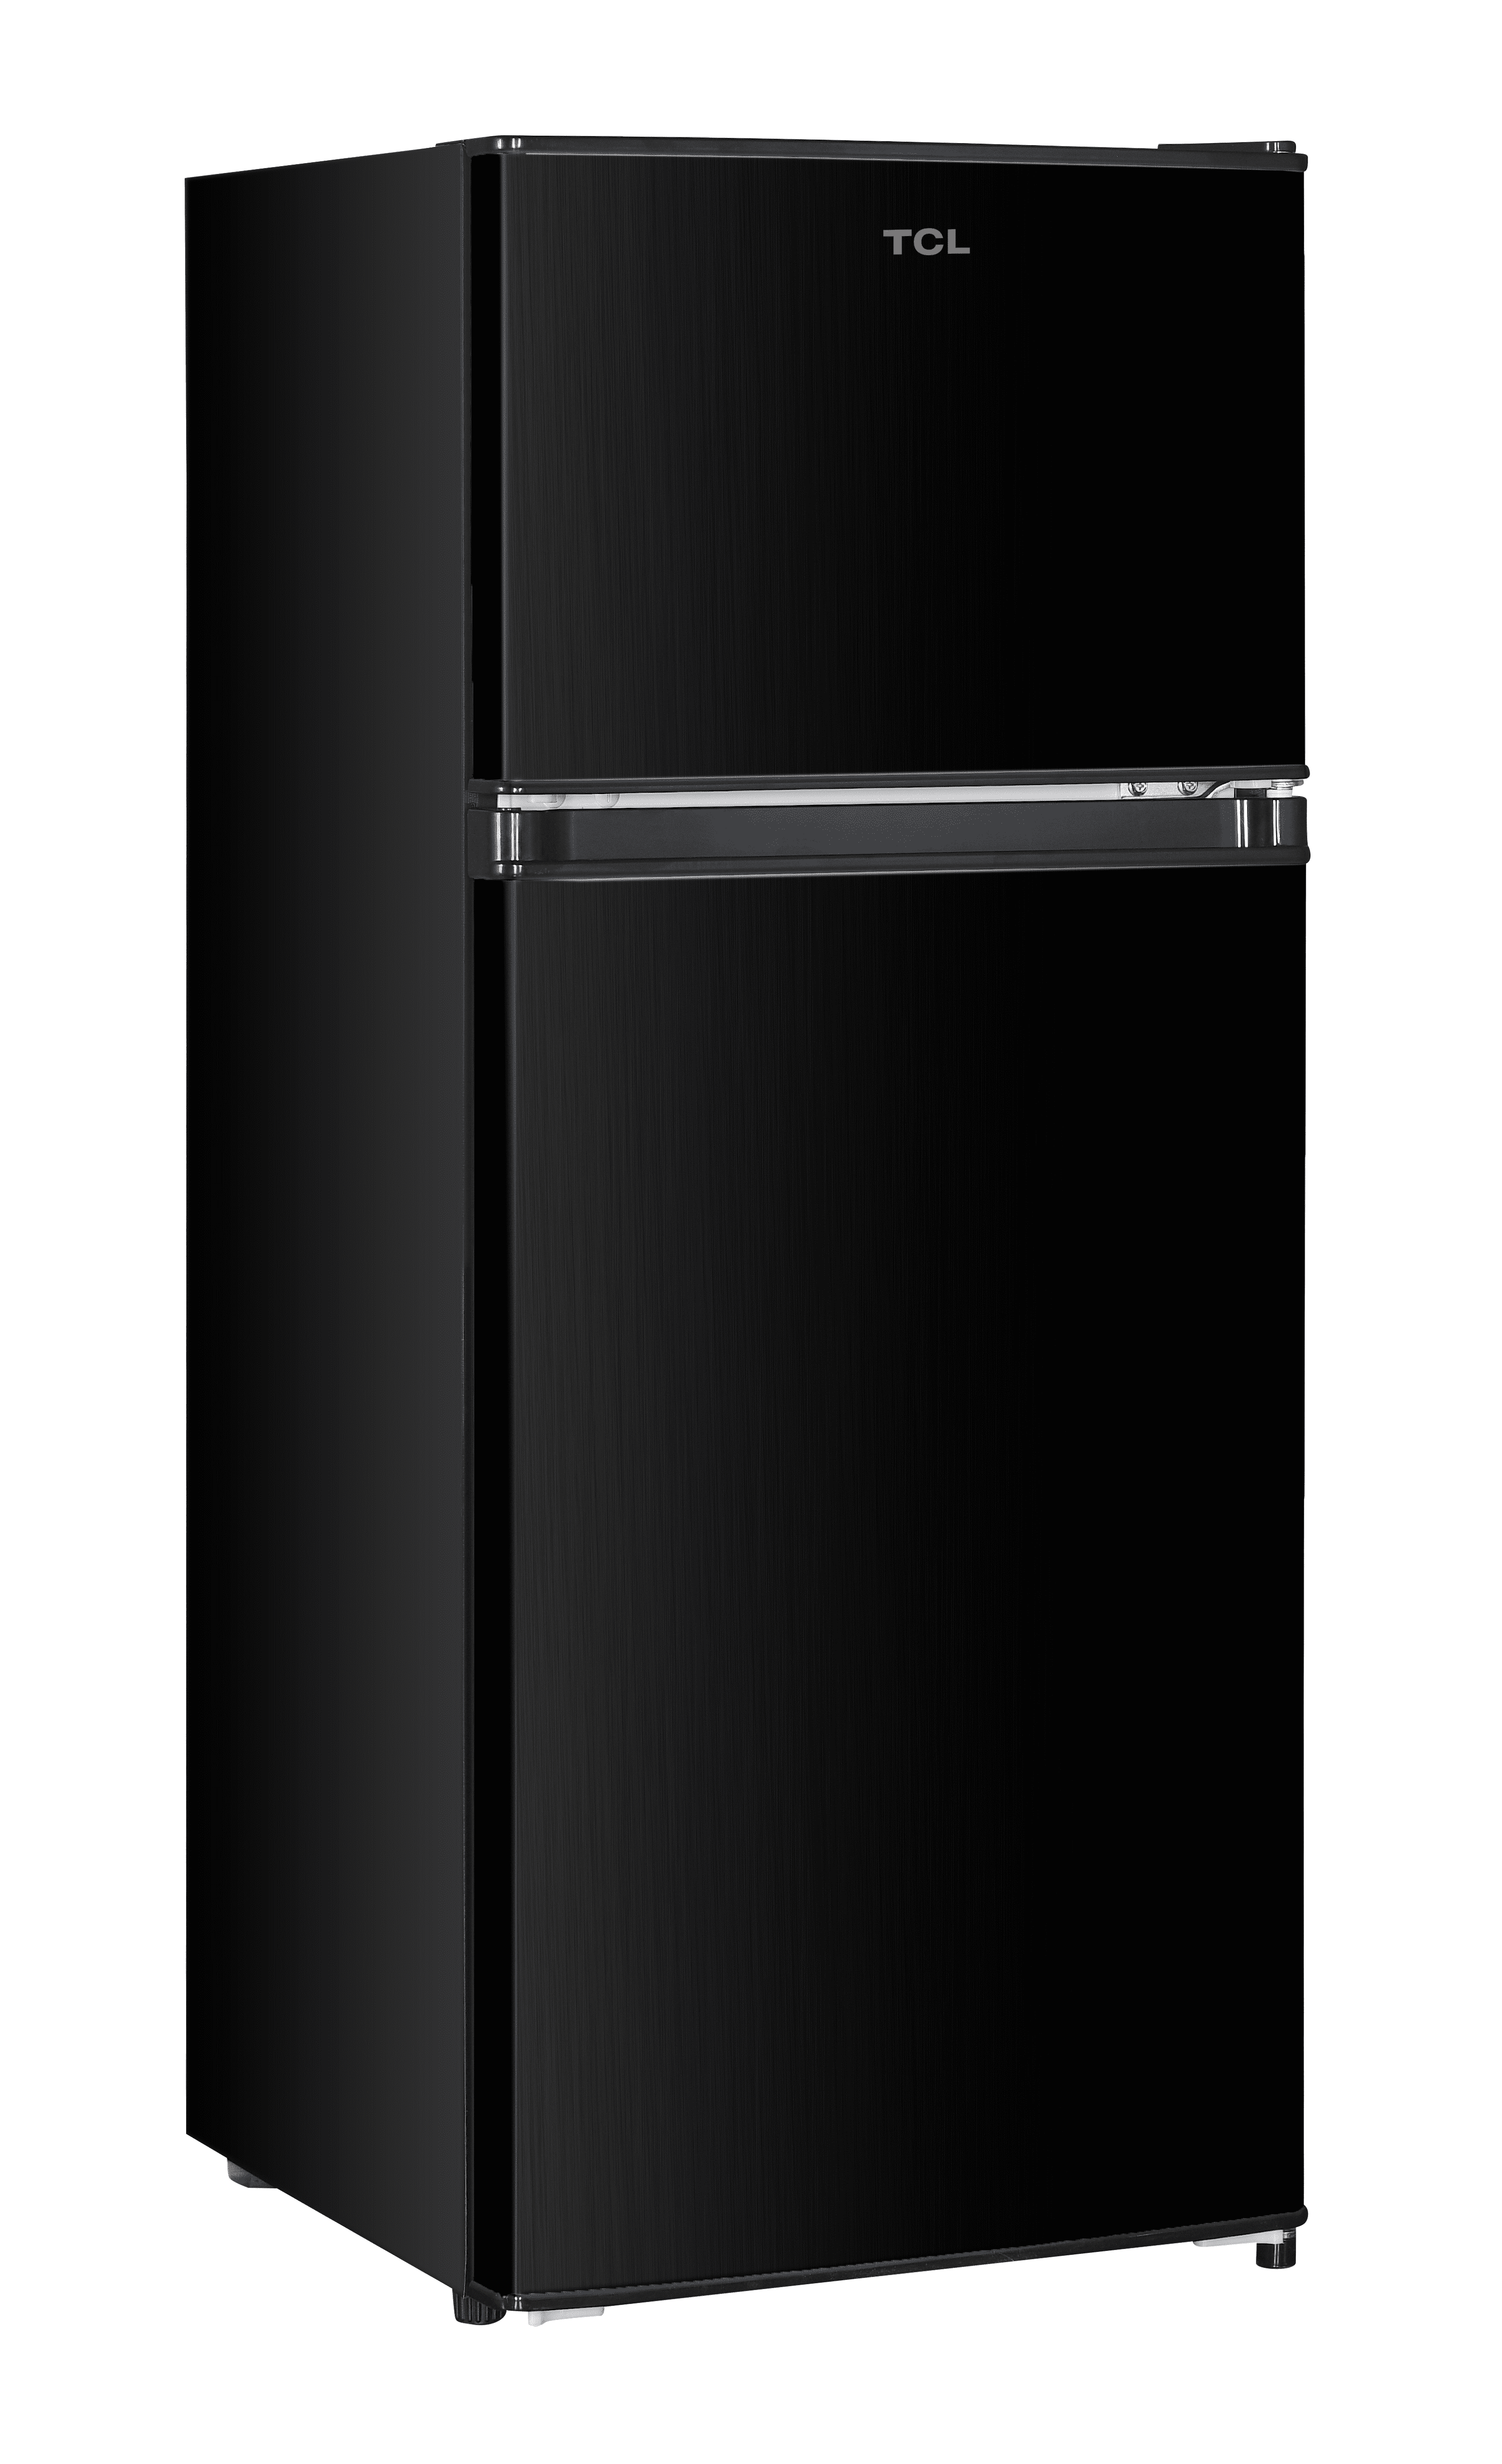 TCL 4.5 Cu. ft. Two Door Refrigerator – Black Stainless Look, MR453Z